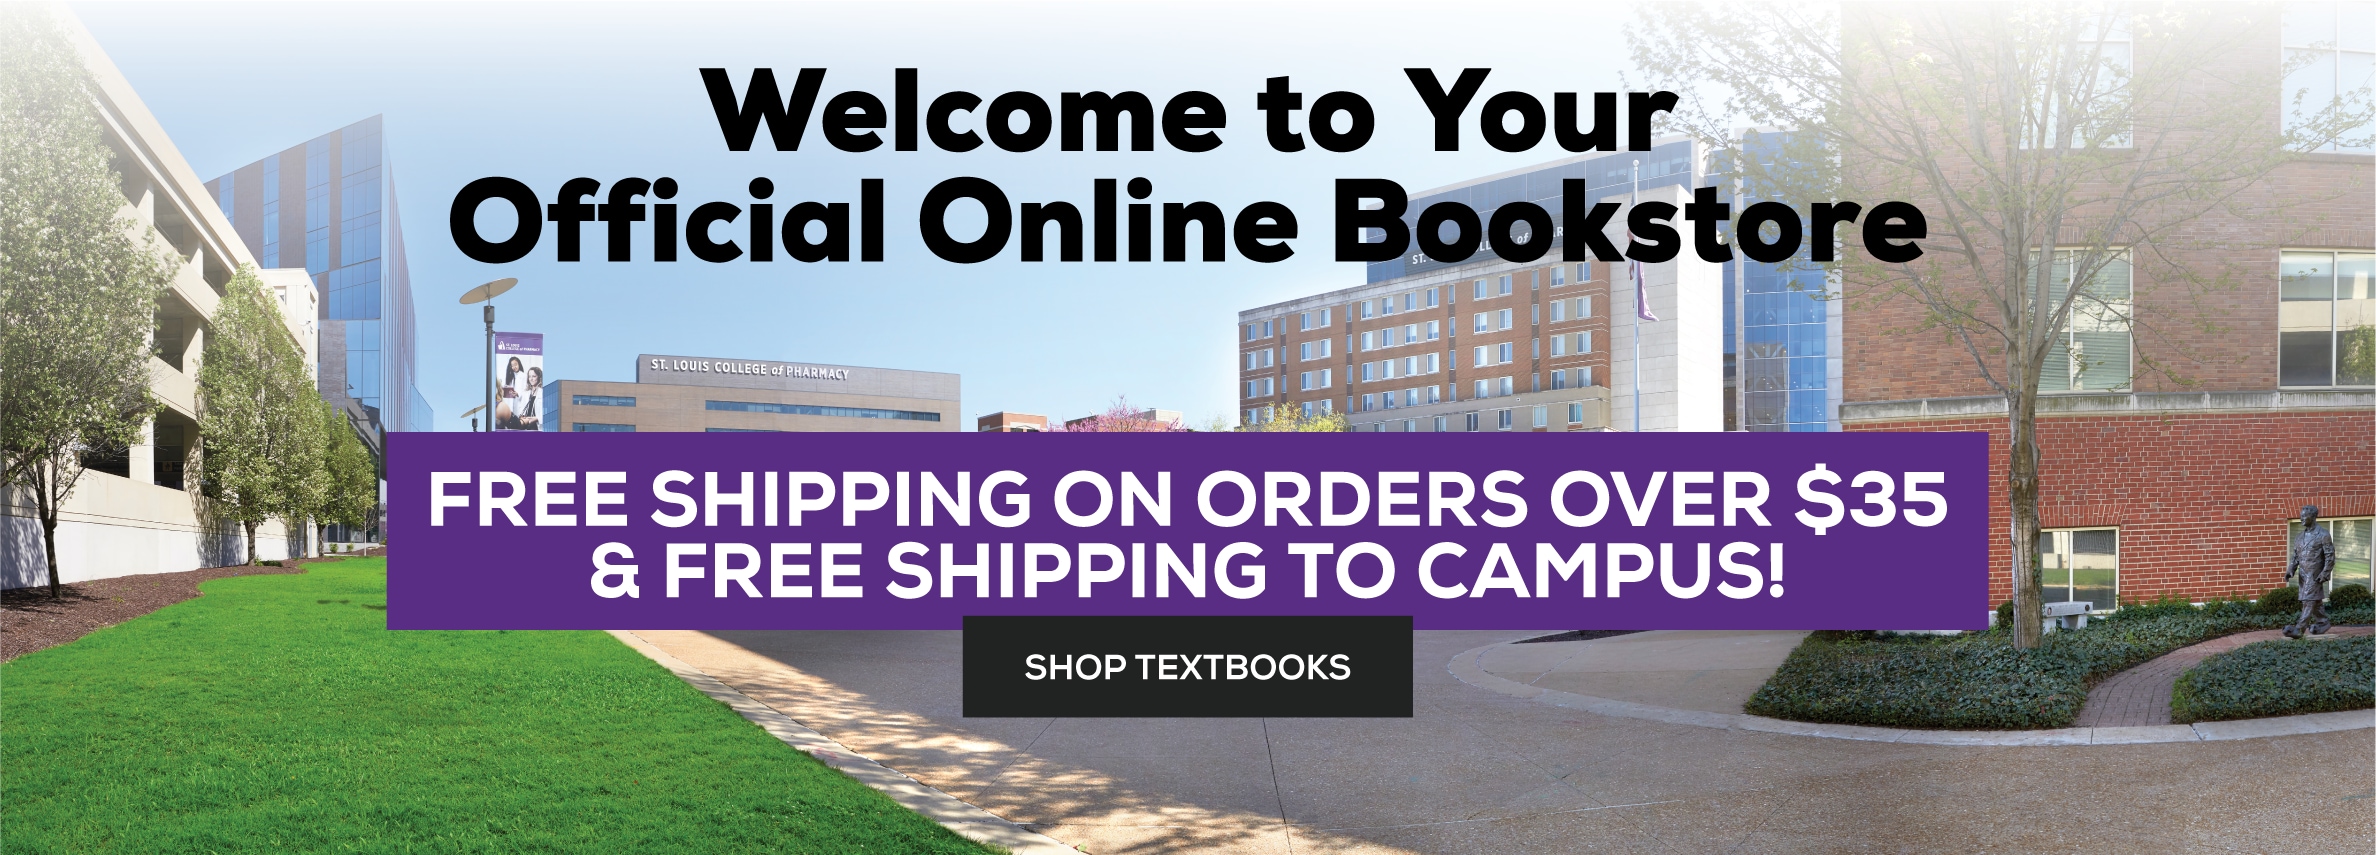 Welcome to your official online bookstore. Free shipping on all orders over $35 and free shipping to campus! Shop textbooks.